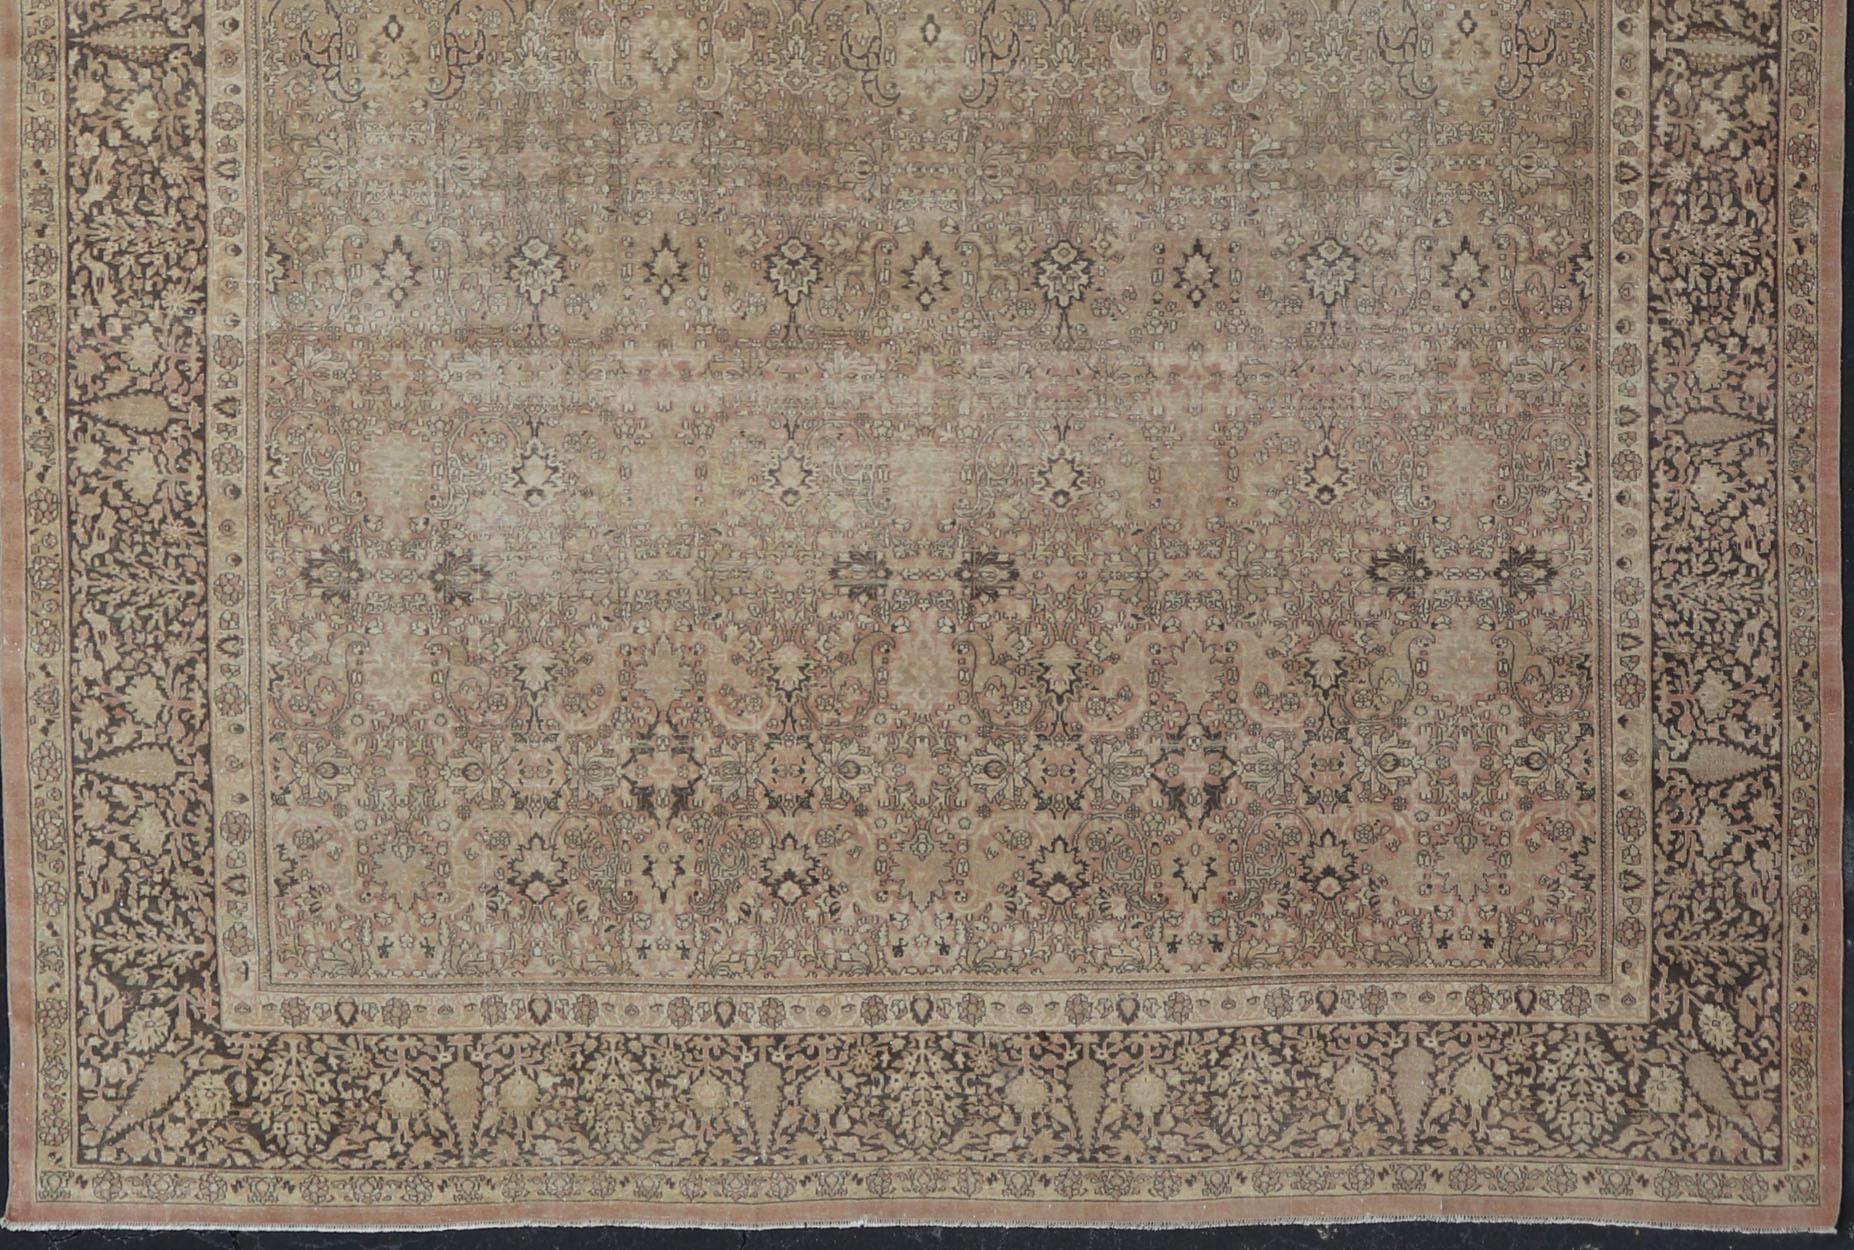 Large Antique Turkish Sivas Rug with Floral Design in Earthy Neutral Tones  For Sale 9